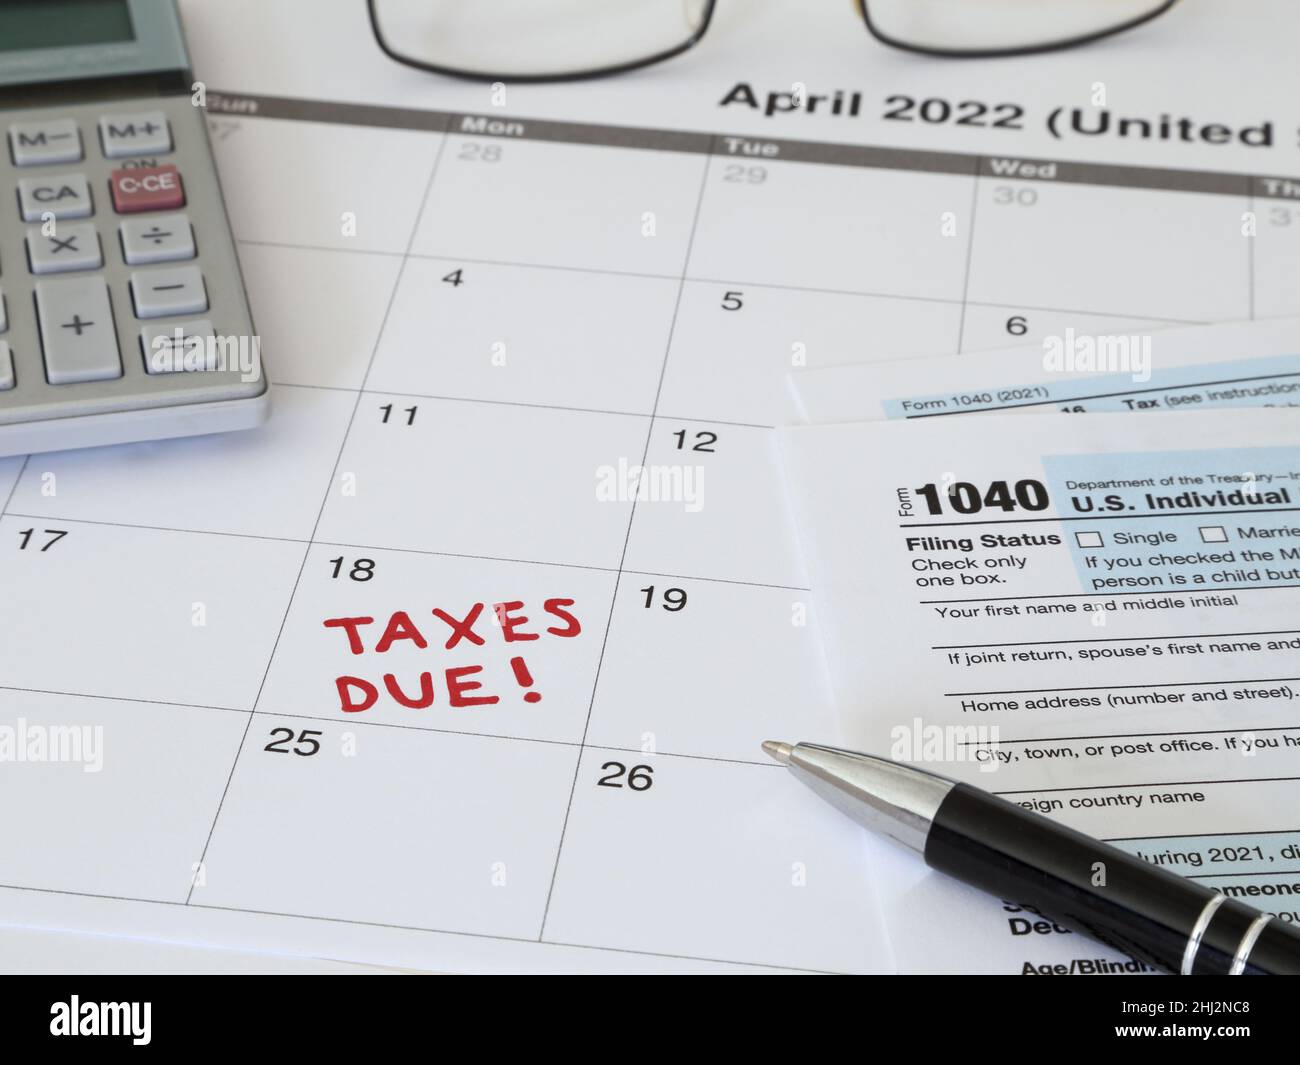 A 2022 calendar noting the April 18 USA Internal Revenue Service IRS income filing deadline for year 2021 taxes is shown up close. Stock Photo